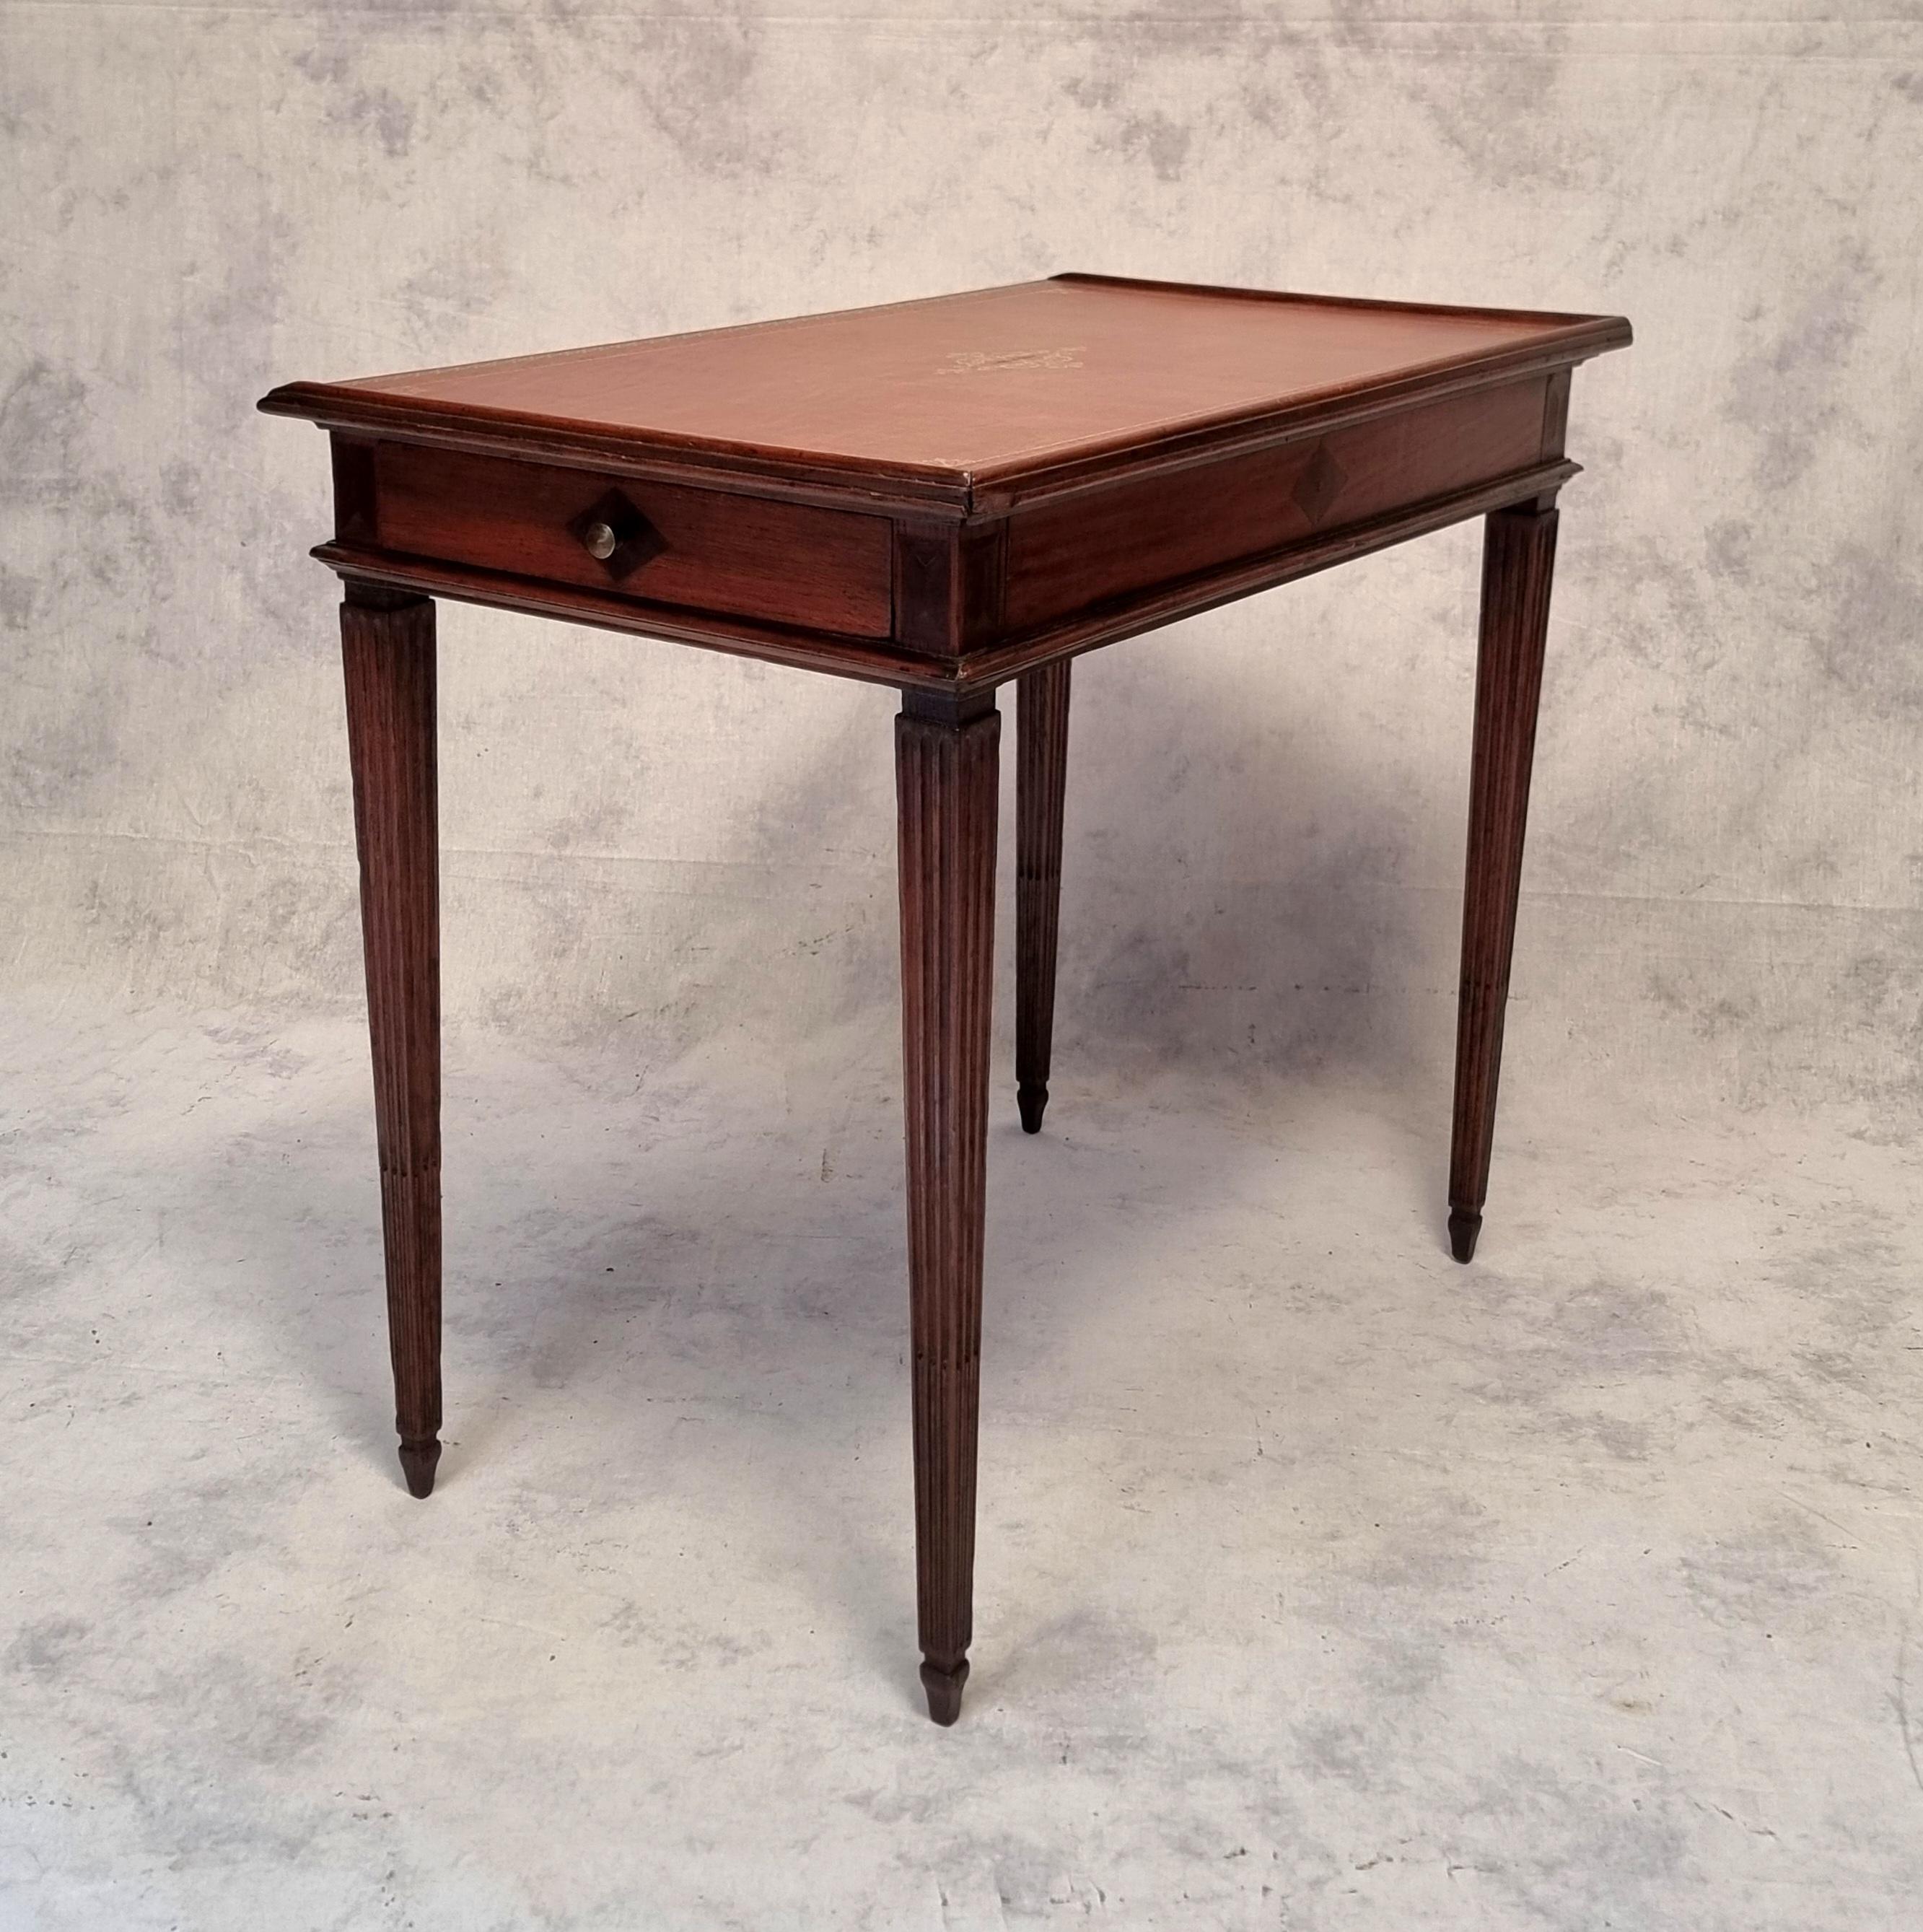 Small side table, writing tabke from the Louis XVI period. Work from the end of the 18th century of good quality in solid oak. The top is sheathed in a new leather enriched with golden ornaments. Opens with a drawer in front. The belt is decorated